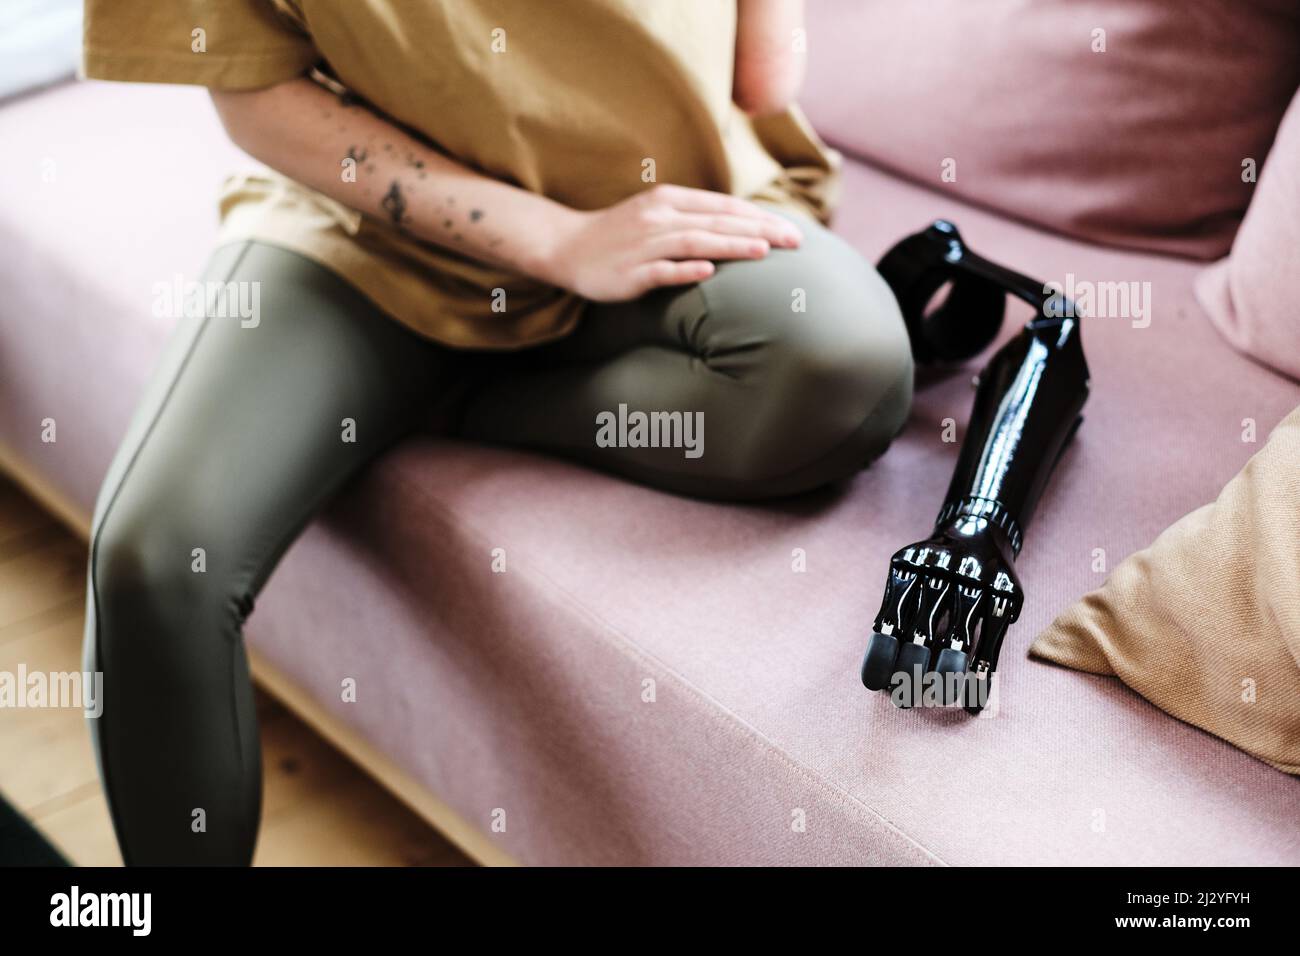 Close-up of young woman with disability sitting on sofa with prosthesis Stock Photo